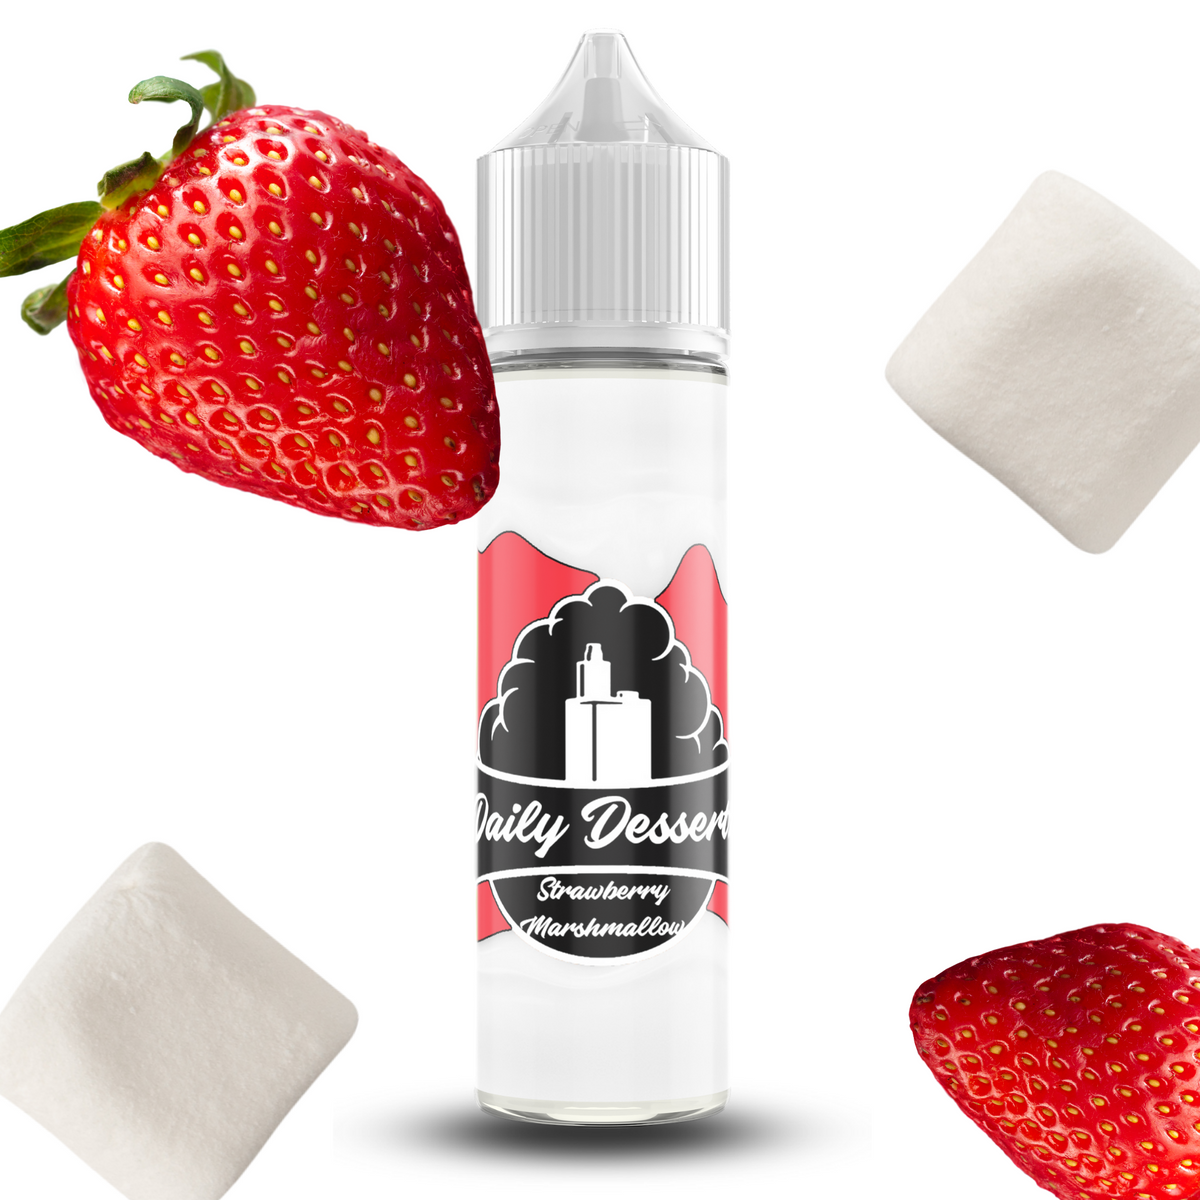 Daily Dessertz 50ml, the brand that you can trust for amazing flavour. Get your taste buds ready for a Strawberry Marshmallow flavour sensation. 0mg Nicotine. ejuice, vape pen, eliquid, e cigarette, 50ml, vaping, PG, VG, 70/30, vape liquid, Flavour, Strawberry Marshmallow, cloud.